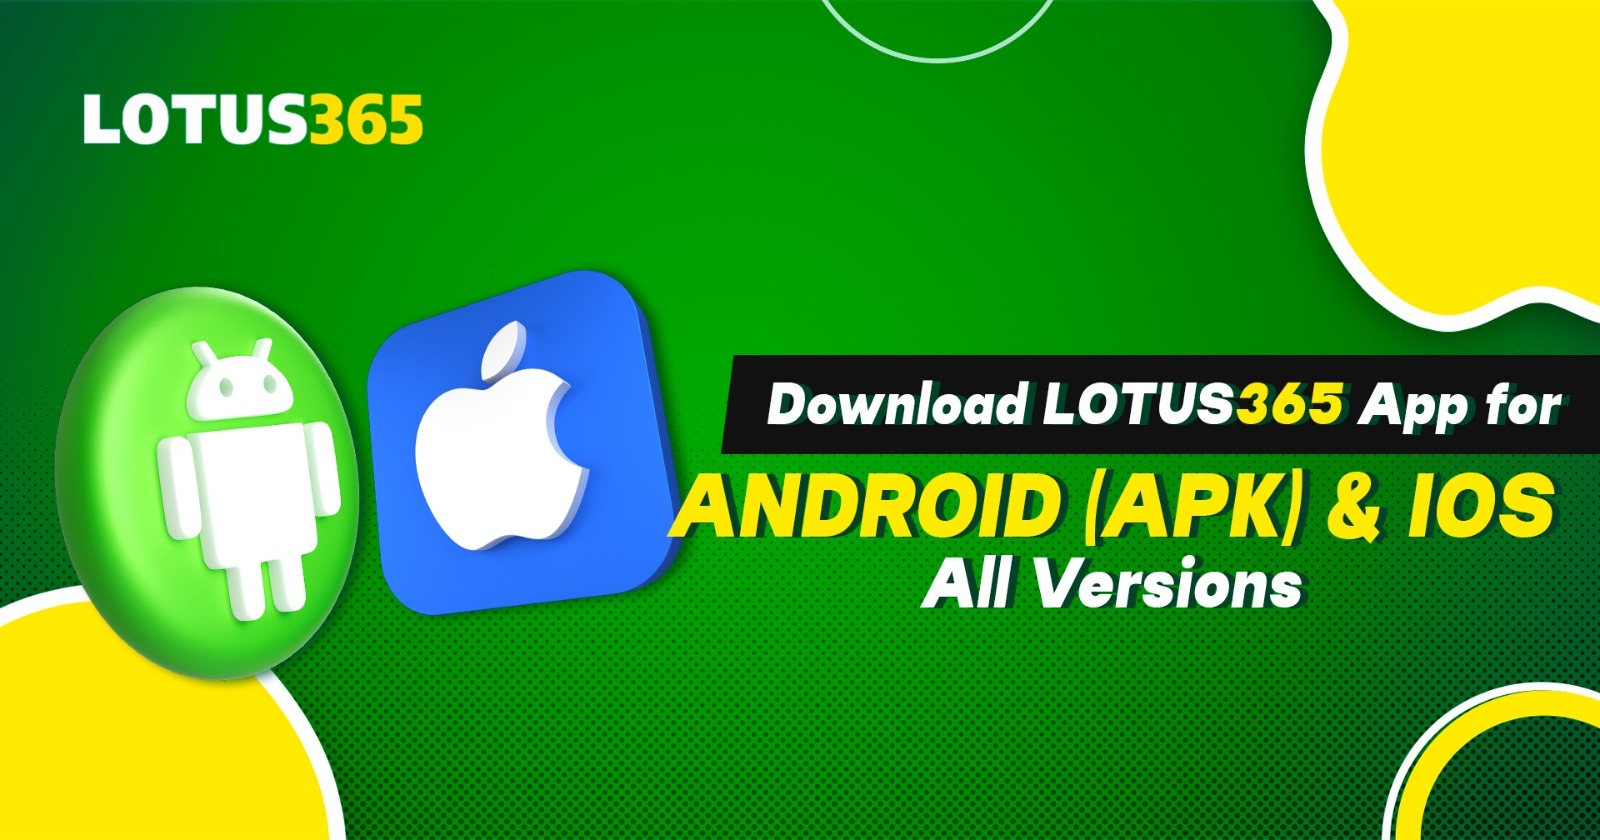 Download Lotus365 App for Android (APK) and iOS - All Version